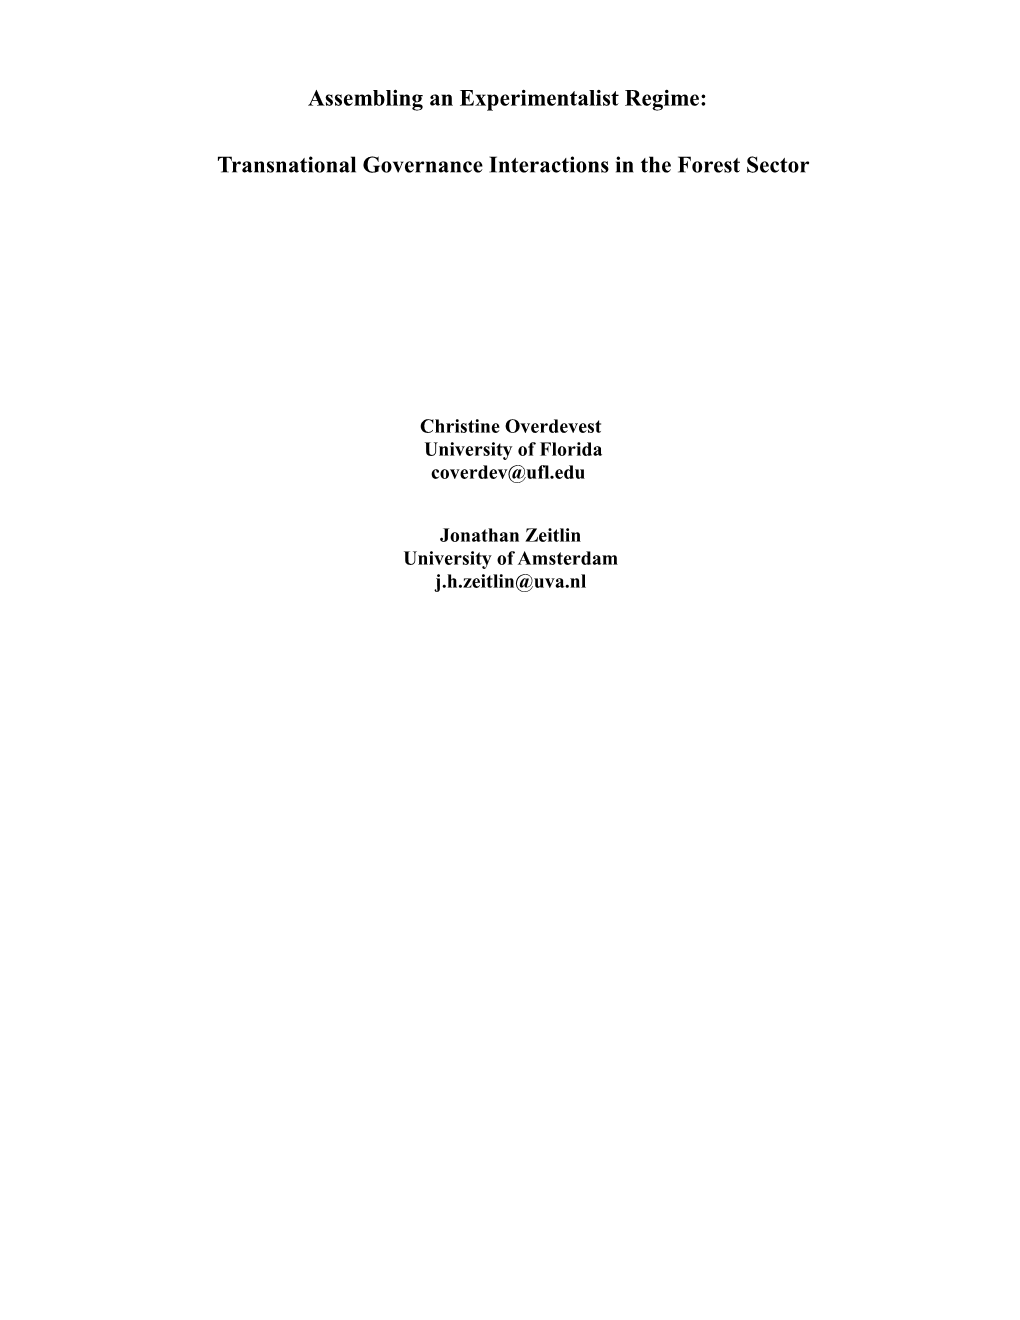 Assembling an Experimentalist Regime: Transnational Governance Interactions in the Forest